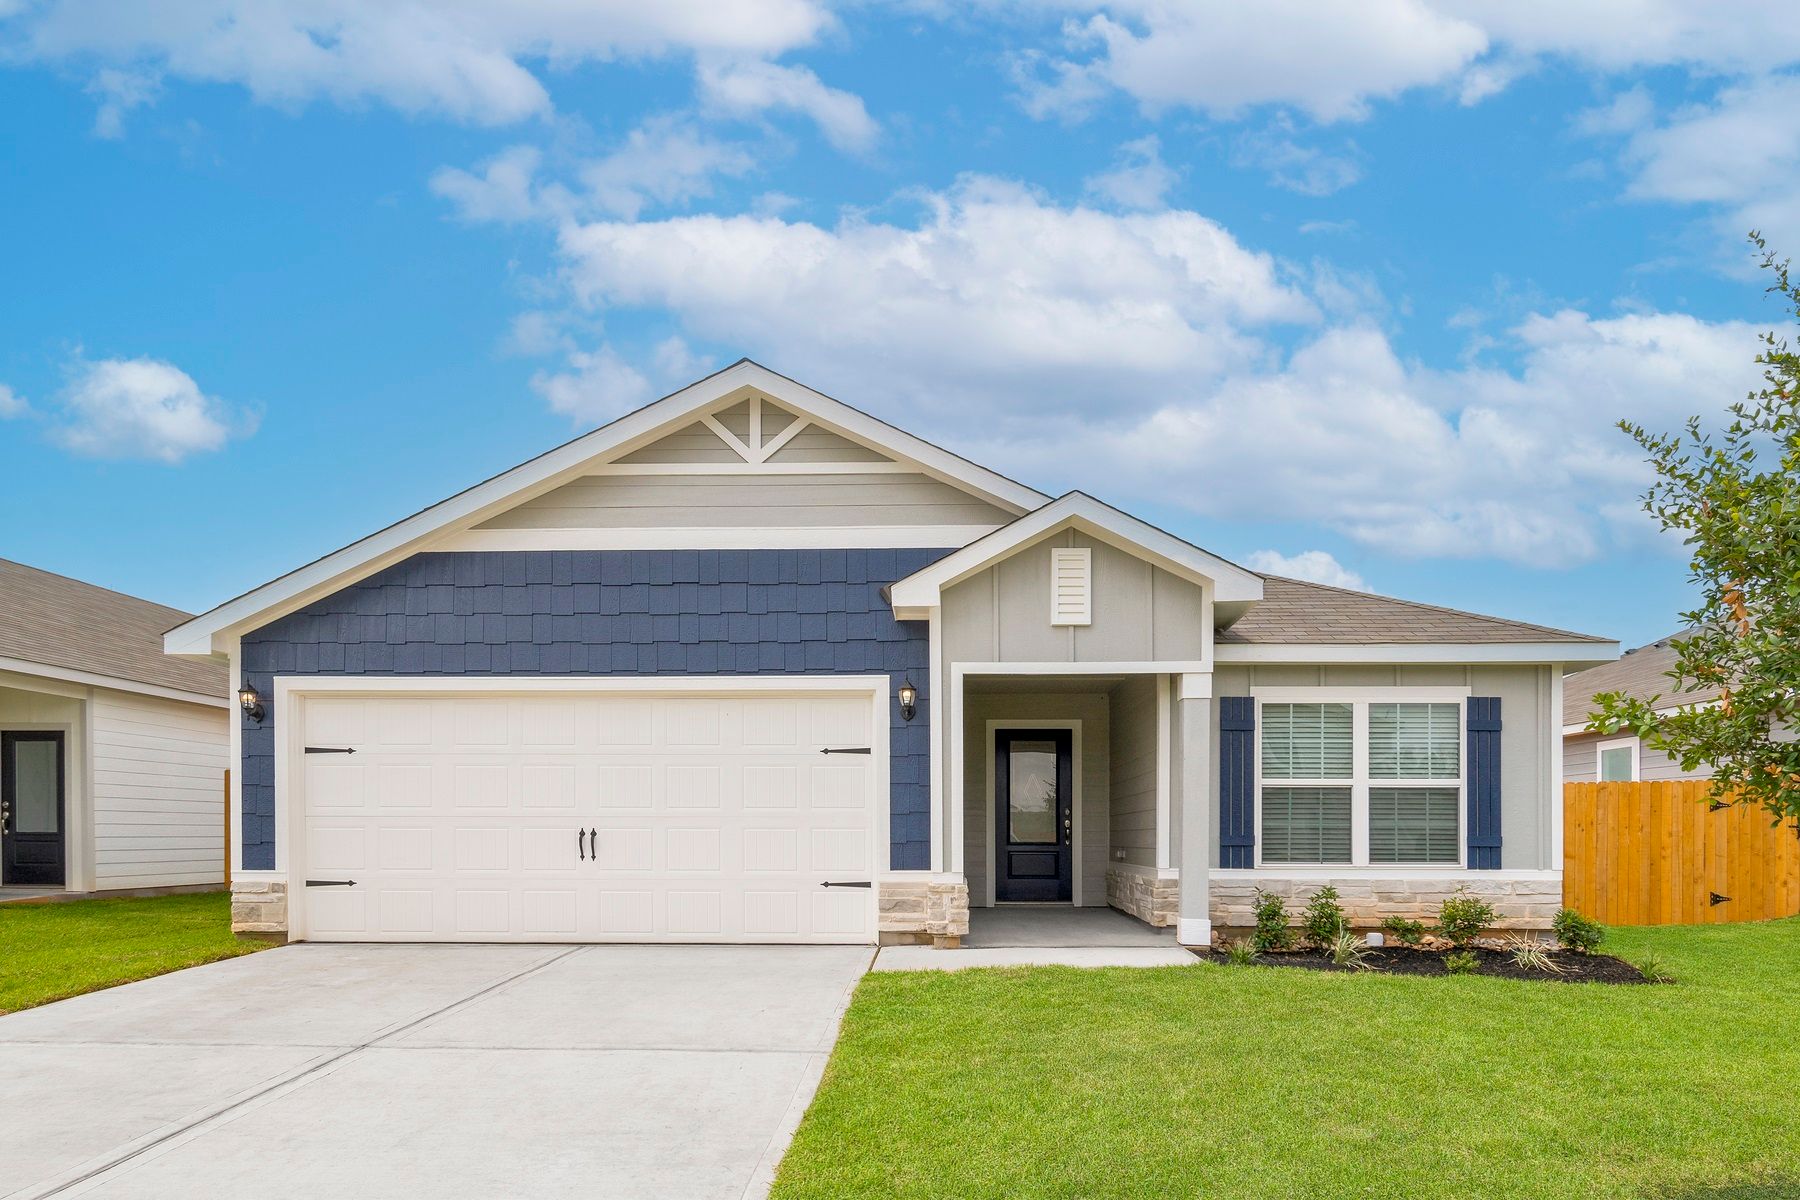 Sweetwater Ridge by LGI Homes:Enjoy the serenity that comes with owning your home in this peaceful community.